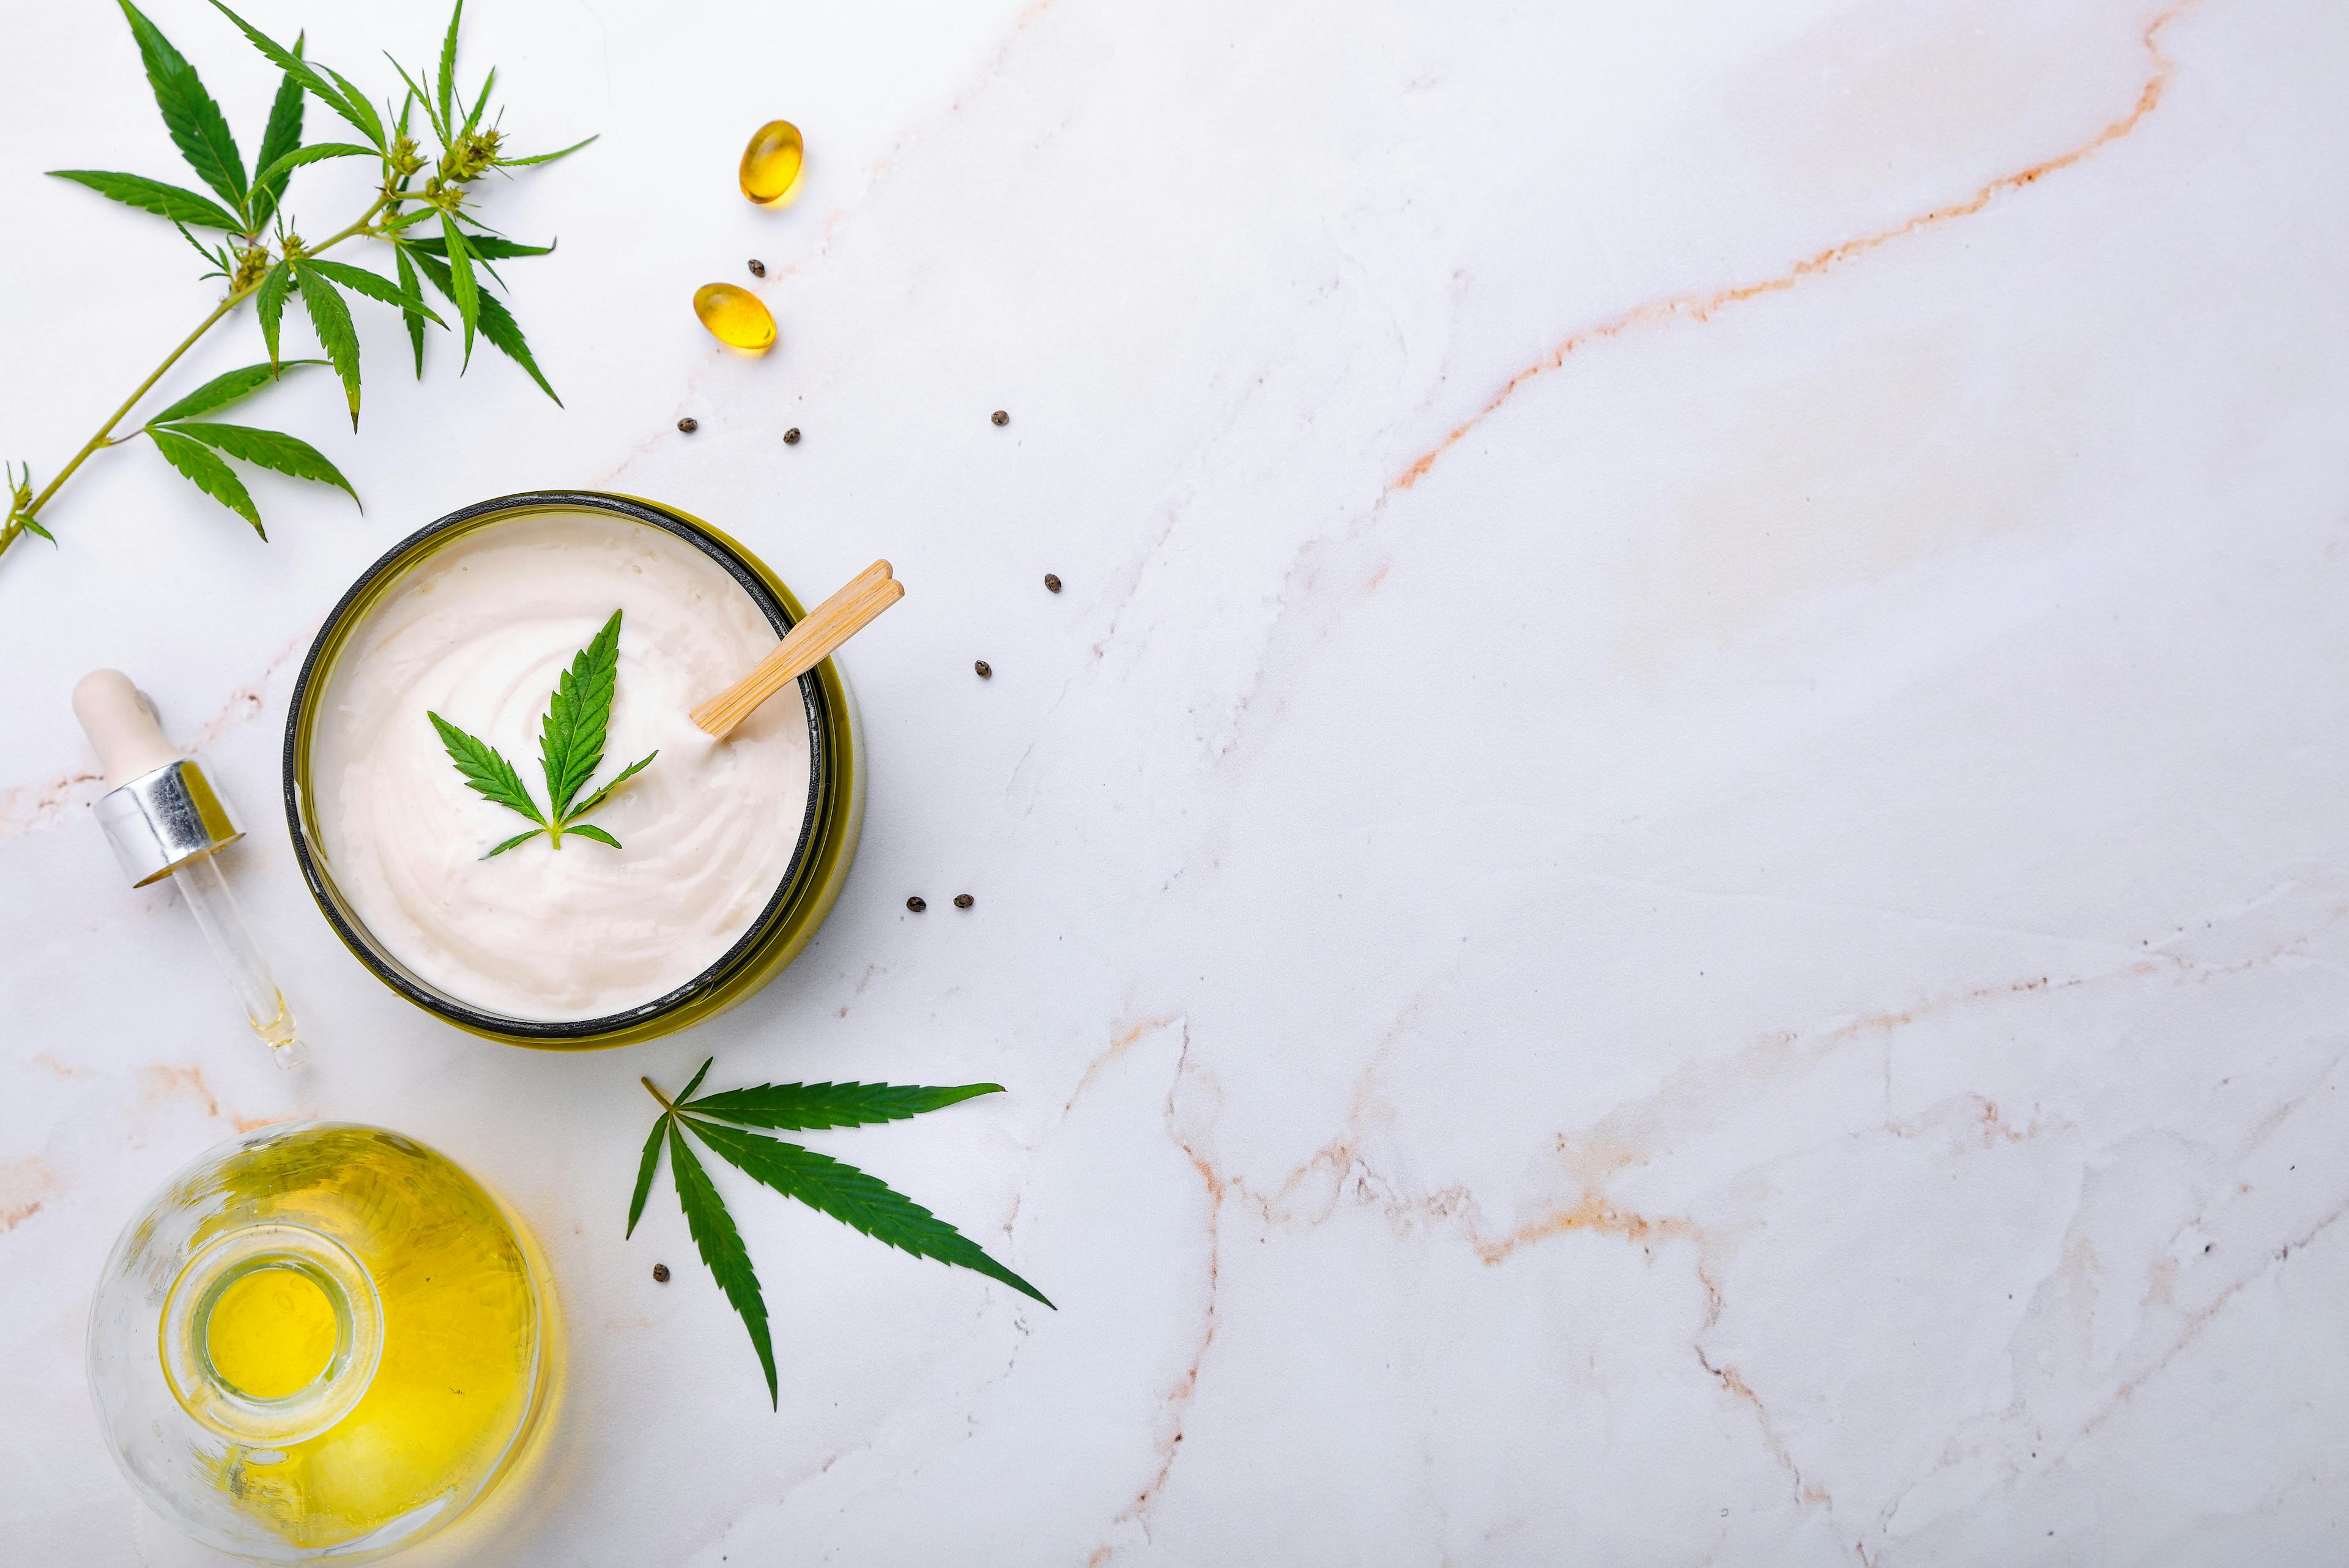 POLL: Are Your Patients Turning to CBD Products to Treat Skin Conditions?